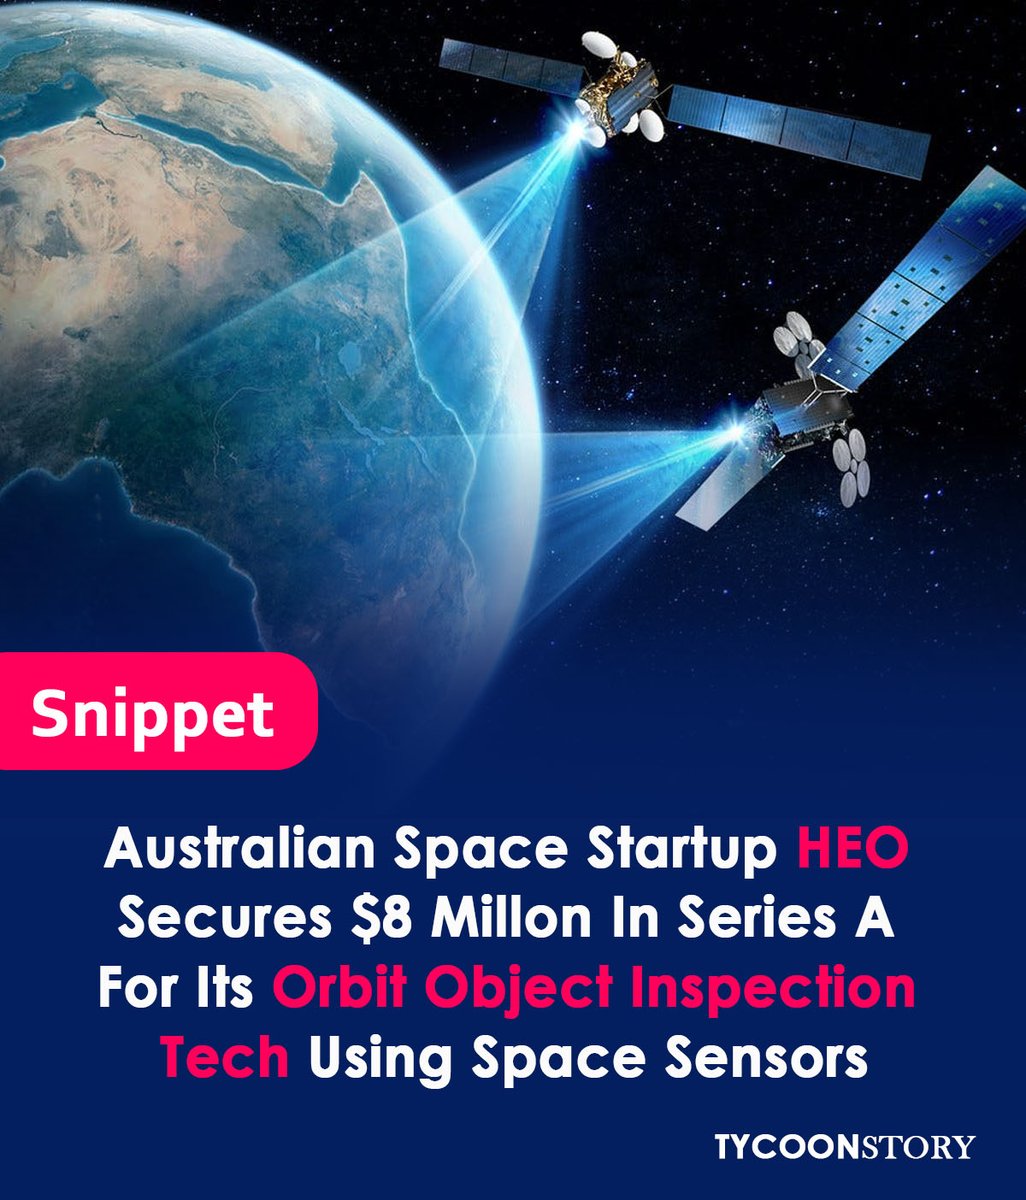 Space startup HEO from Australia receives $8 million in Series A funding for their orbital object inspection technology
#startup #satelliteinternet #governmentagencies #spacecraft #funding #orbit #Australia #SpaceImagery #spacetech #spacestartup #HEO #SpaceTechnology